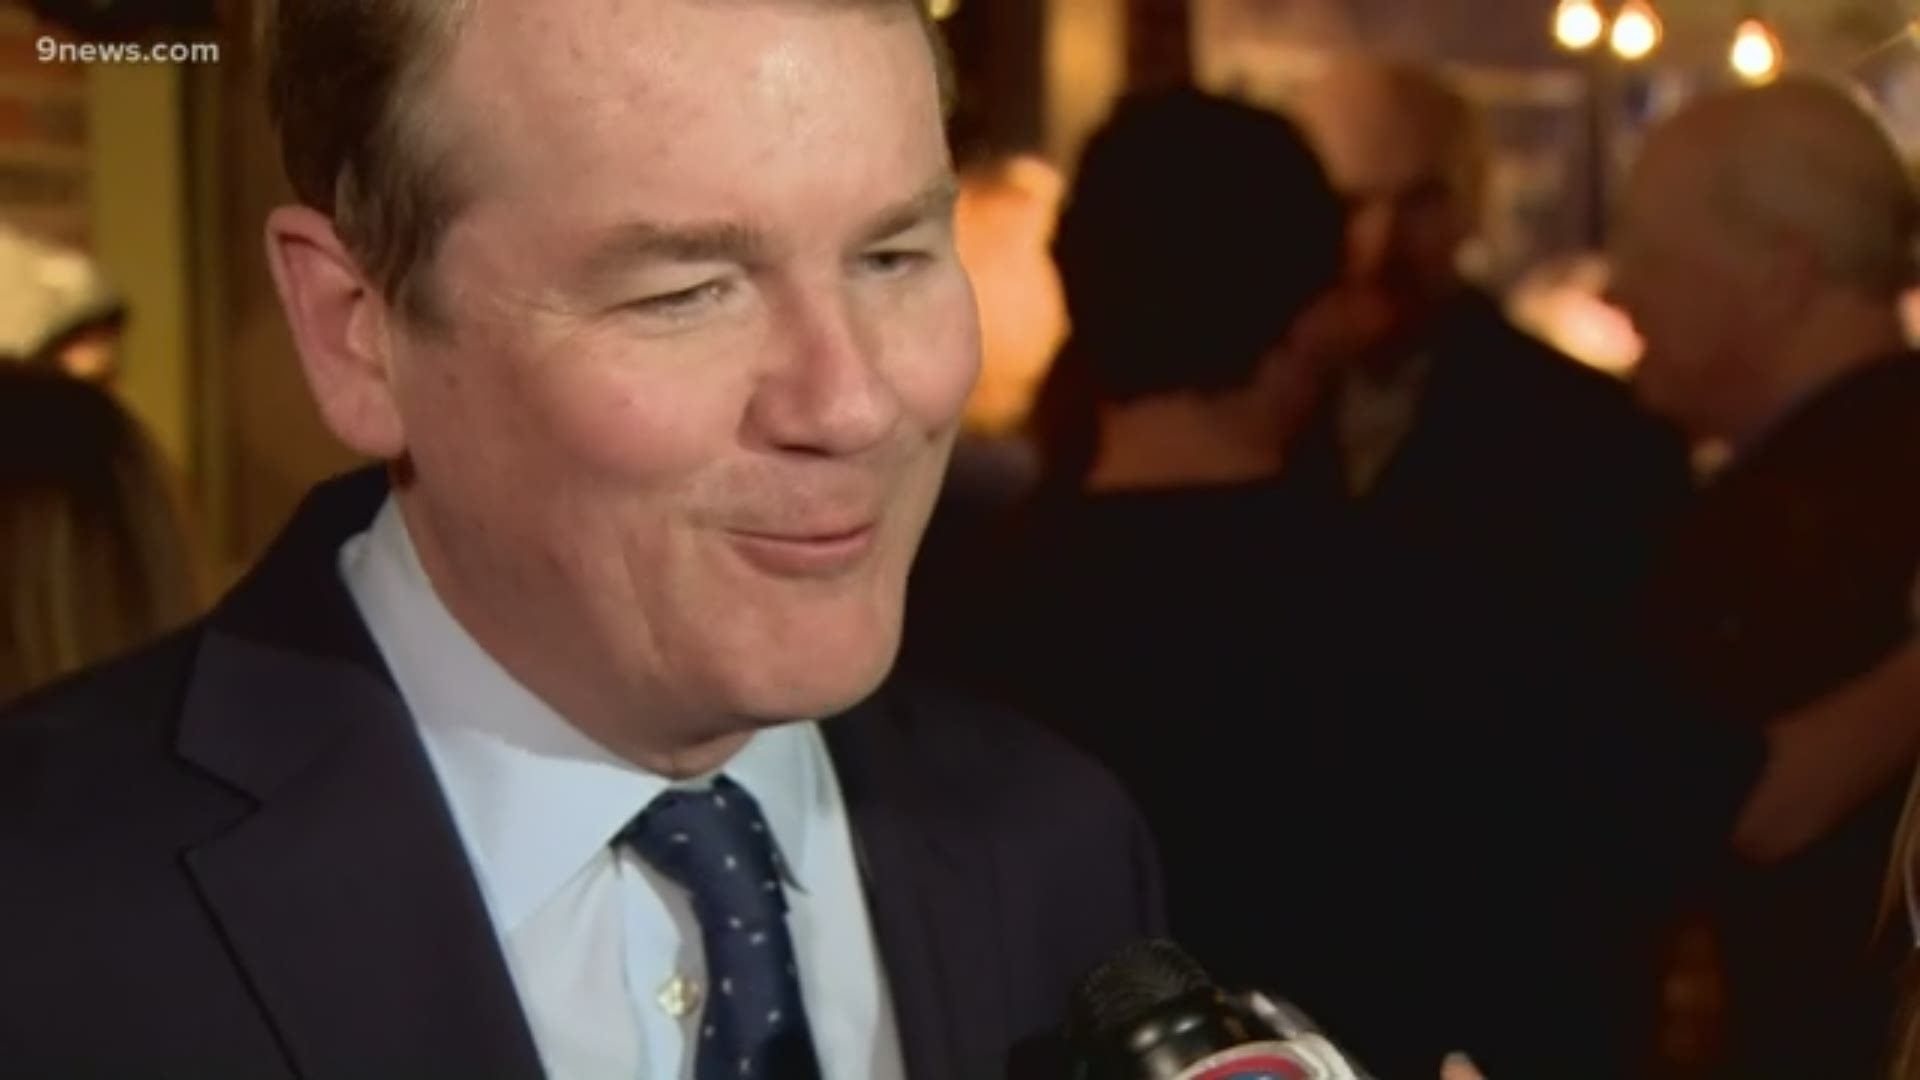 Sen. Michael Bennet (D-Colorado) is speaking from New Hampshire following the state's primary. He announced tonight he's ending his presidential bid.